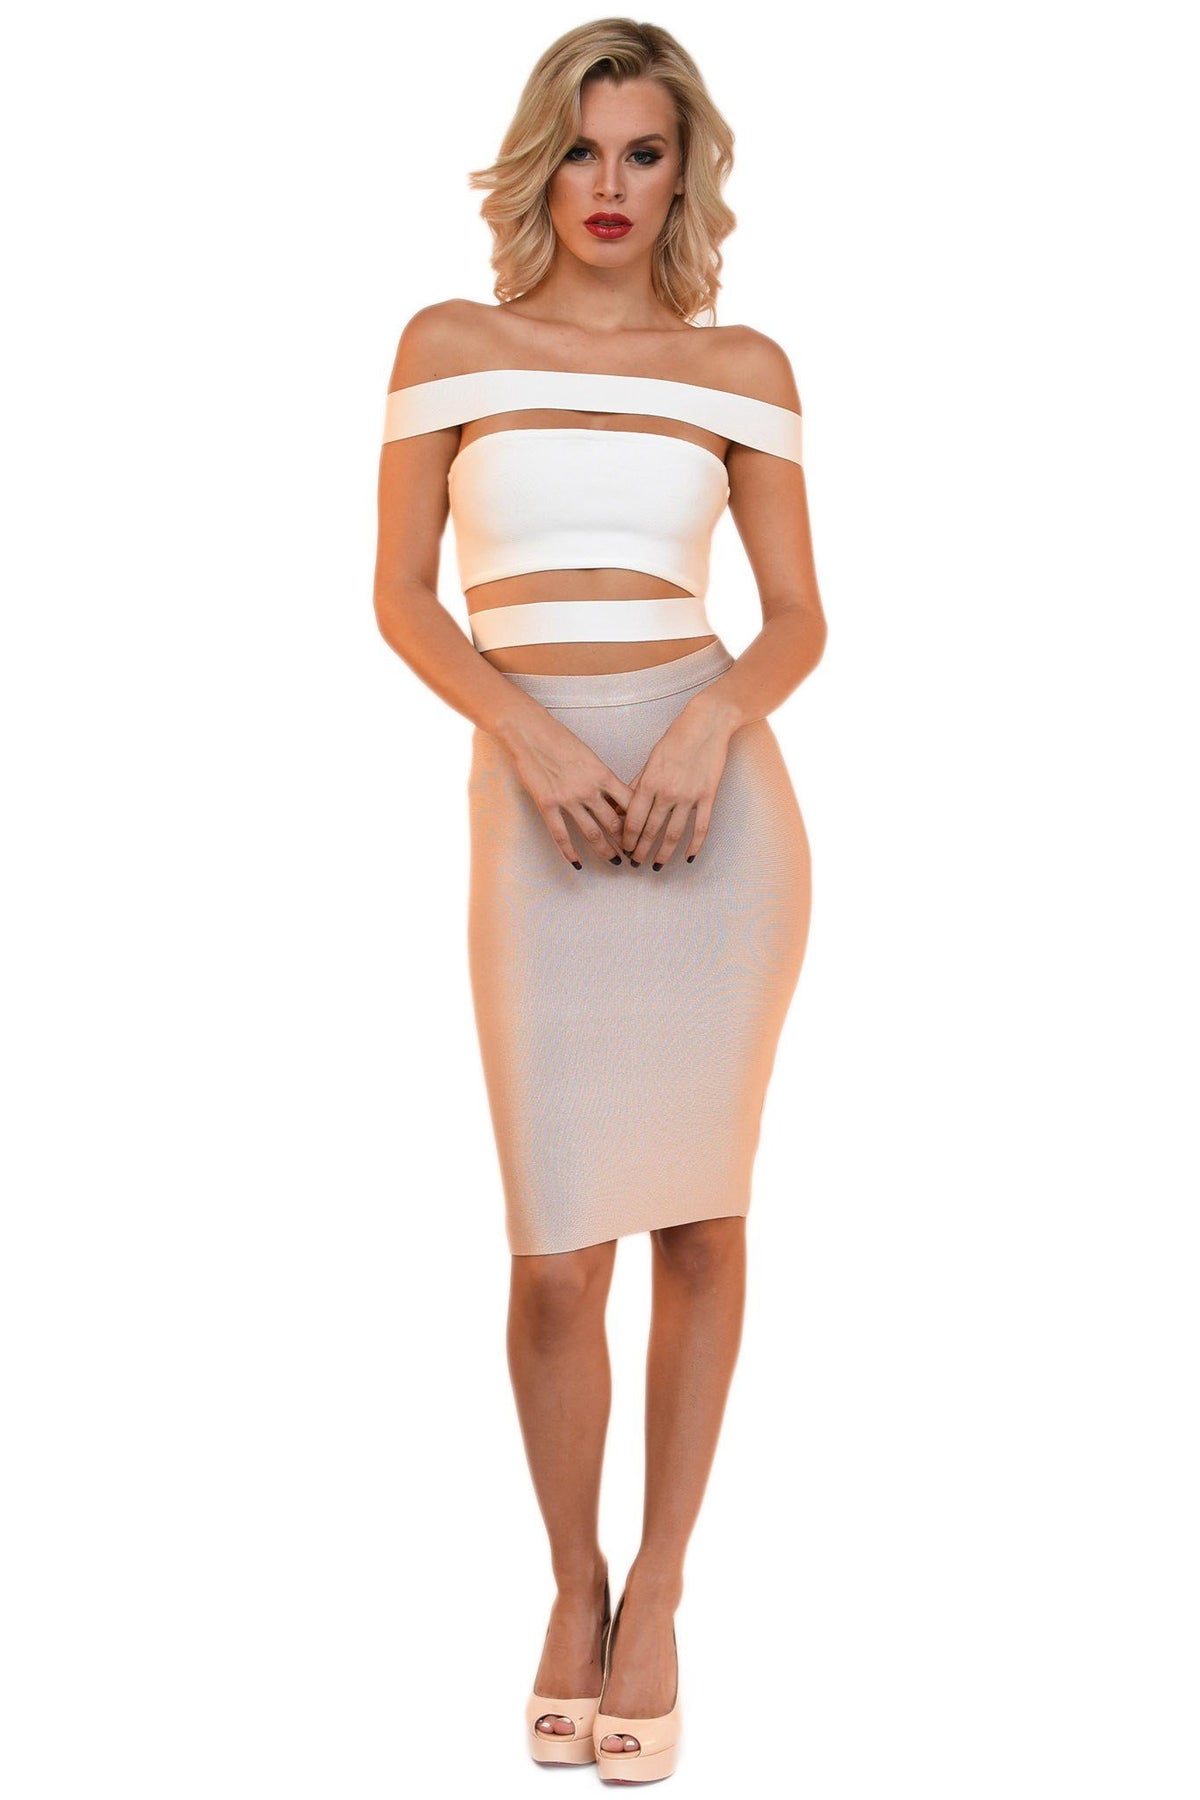 Front of white bandage top featuring off-shoulder panel design and stylish cutouts